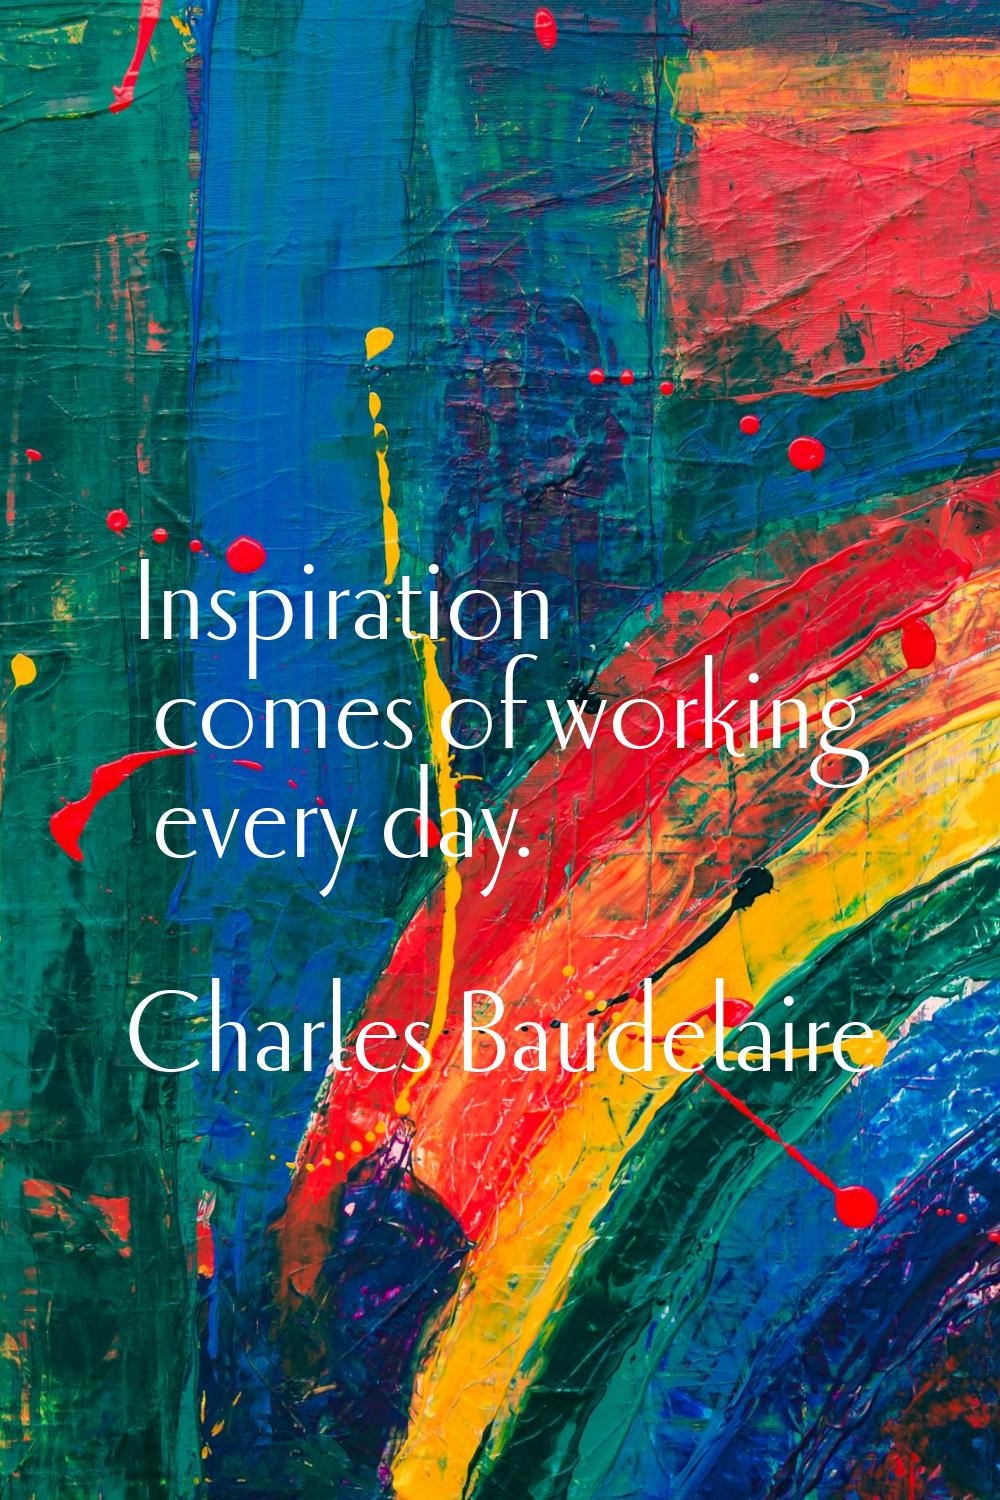 Inspiration comes of working every day.